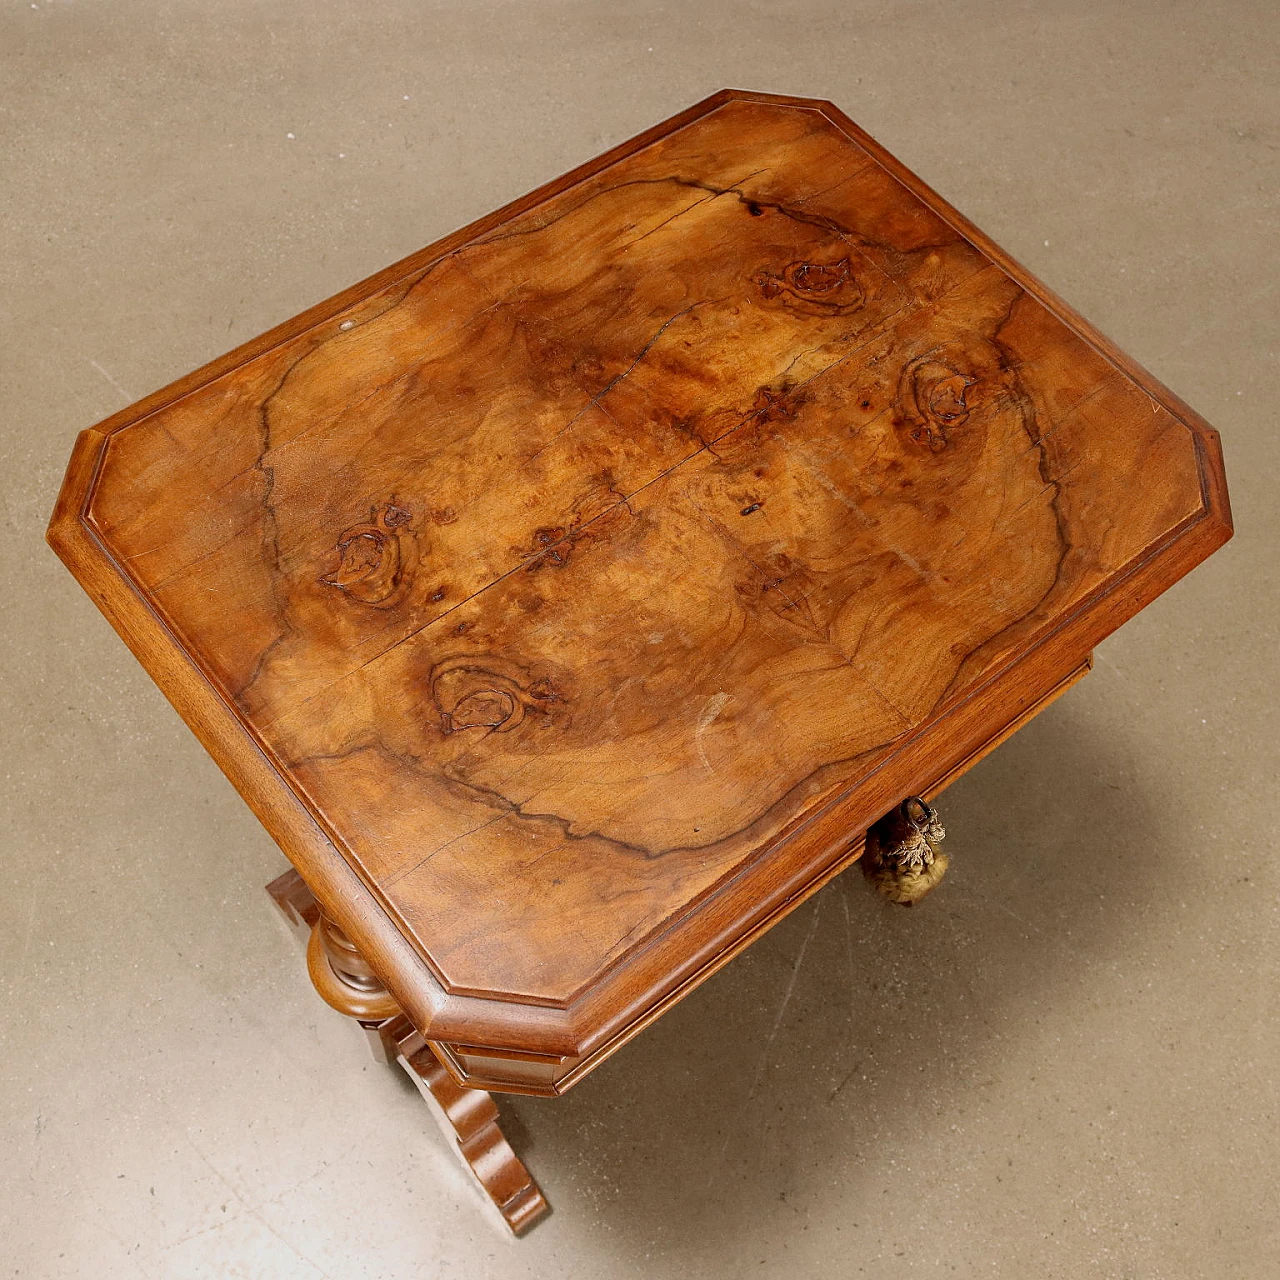 Walnut and cherry wood side table with drawers, 19th century 3